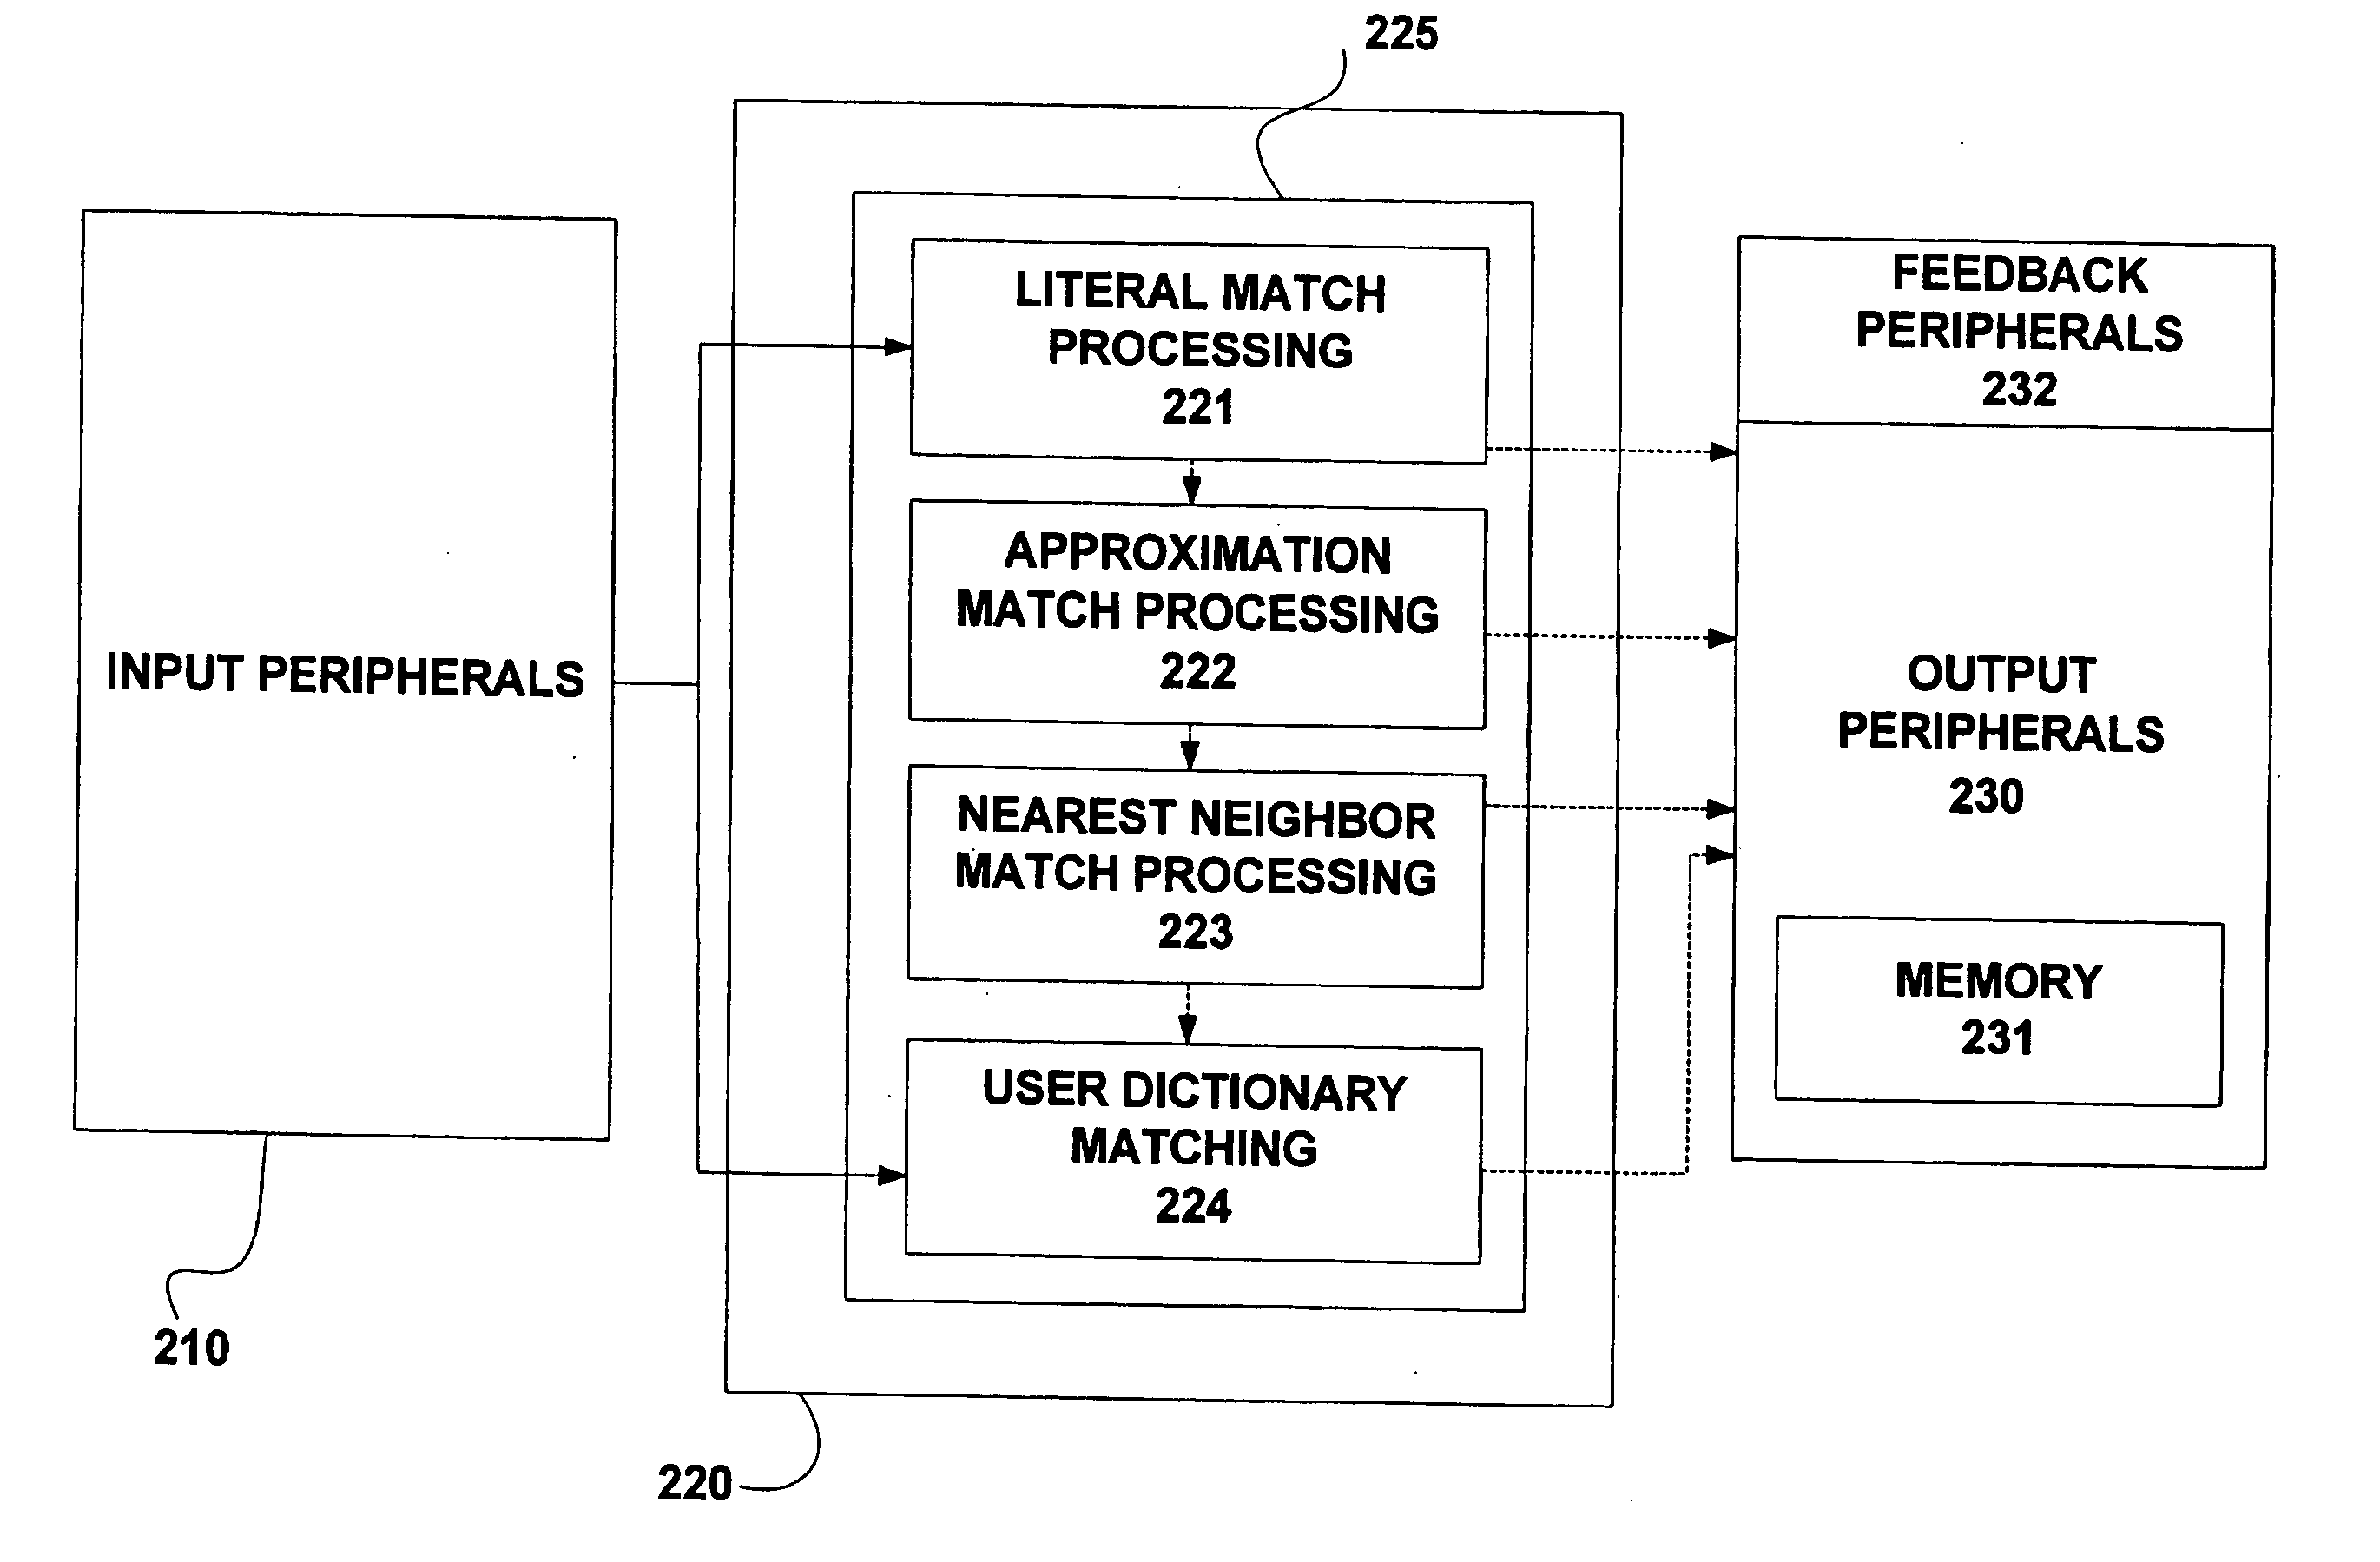 System and method for normalization of a string of words